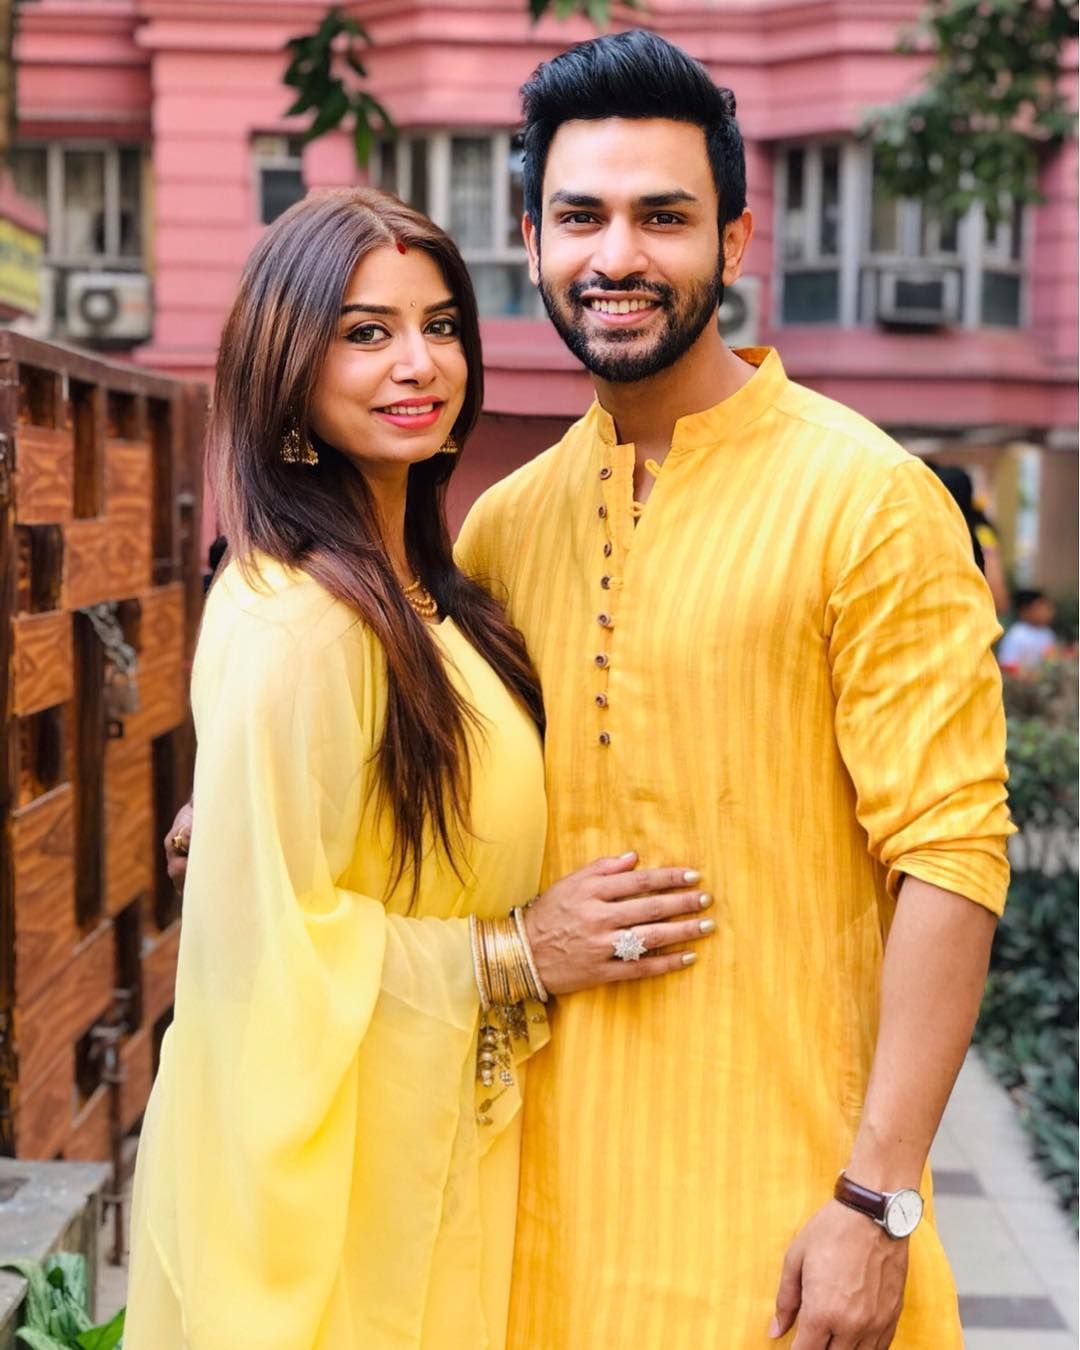 Actor Naman Shaw And Wife Neha Mishra Announce Pregnancy On His Birthday, He Says ‘2020 Ain’t That Bad’